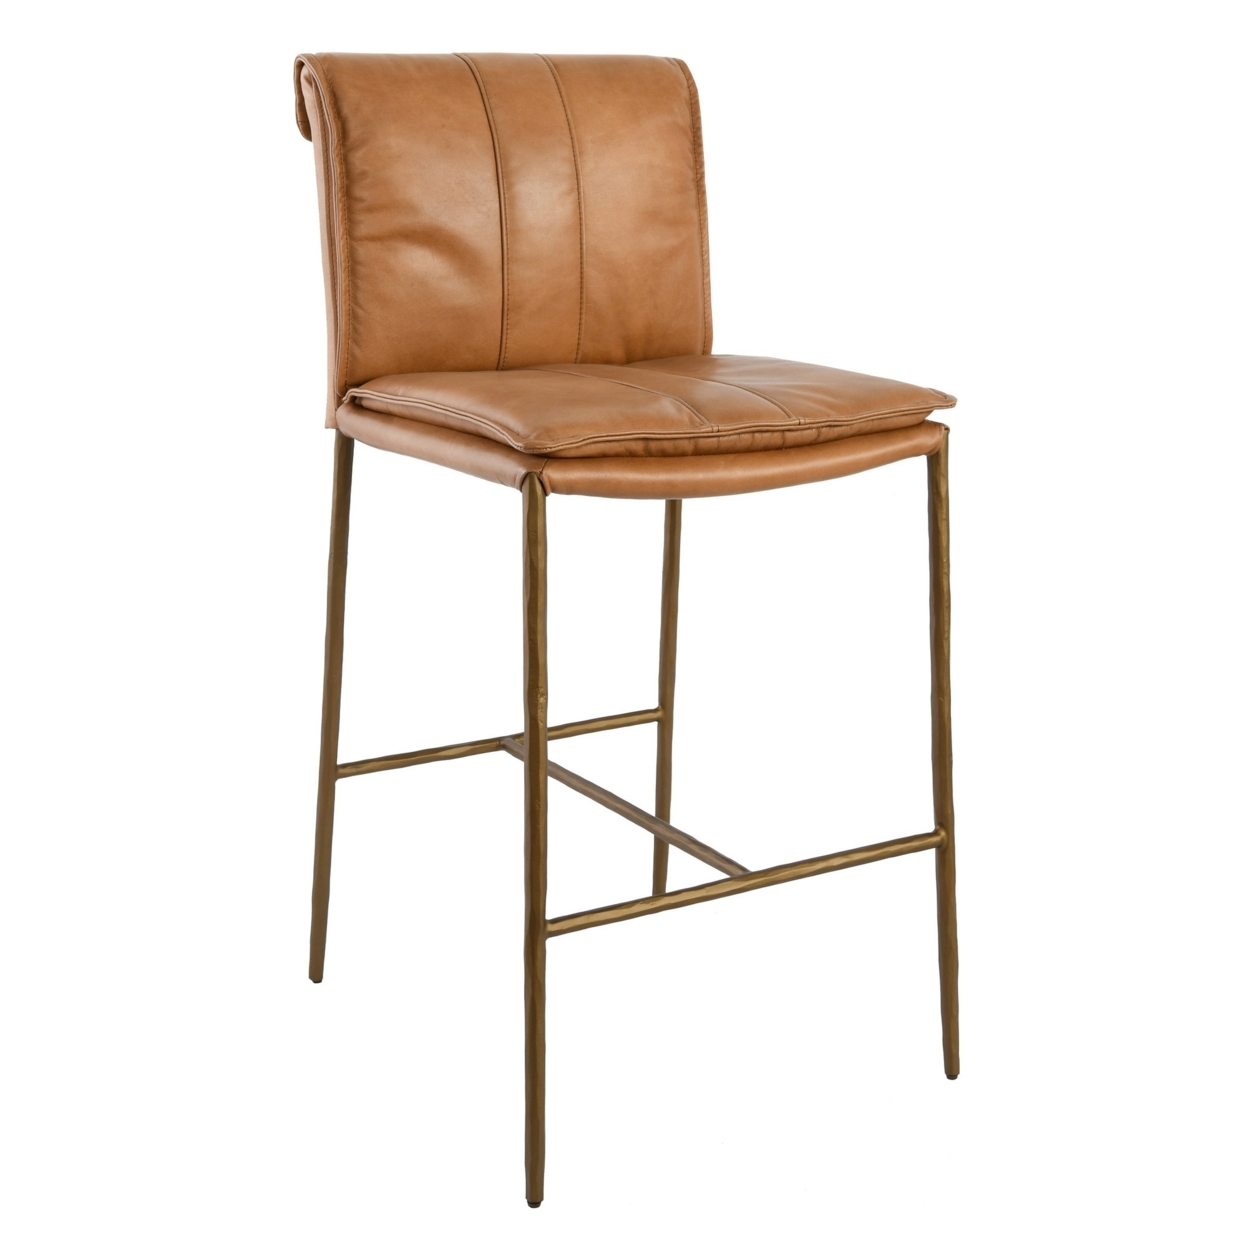 Iva 27 Inch Counter Stool Chair, Rolled Back, Iron, Tan Brown Leather - Saltoro Sherpi